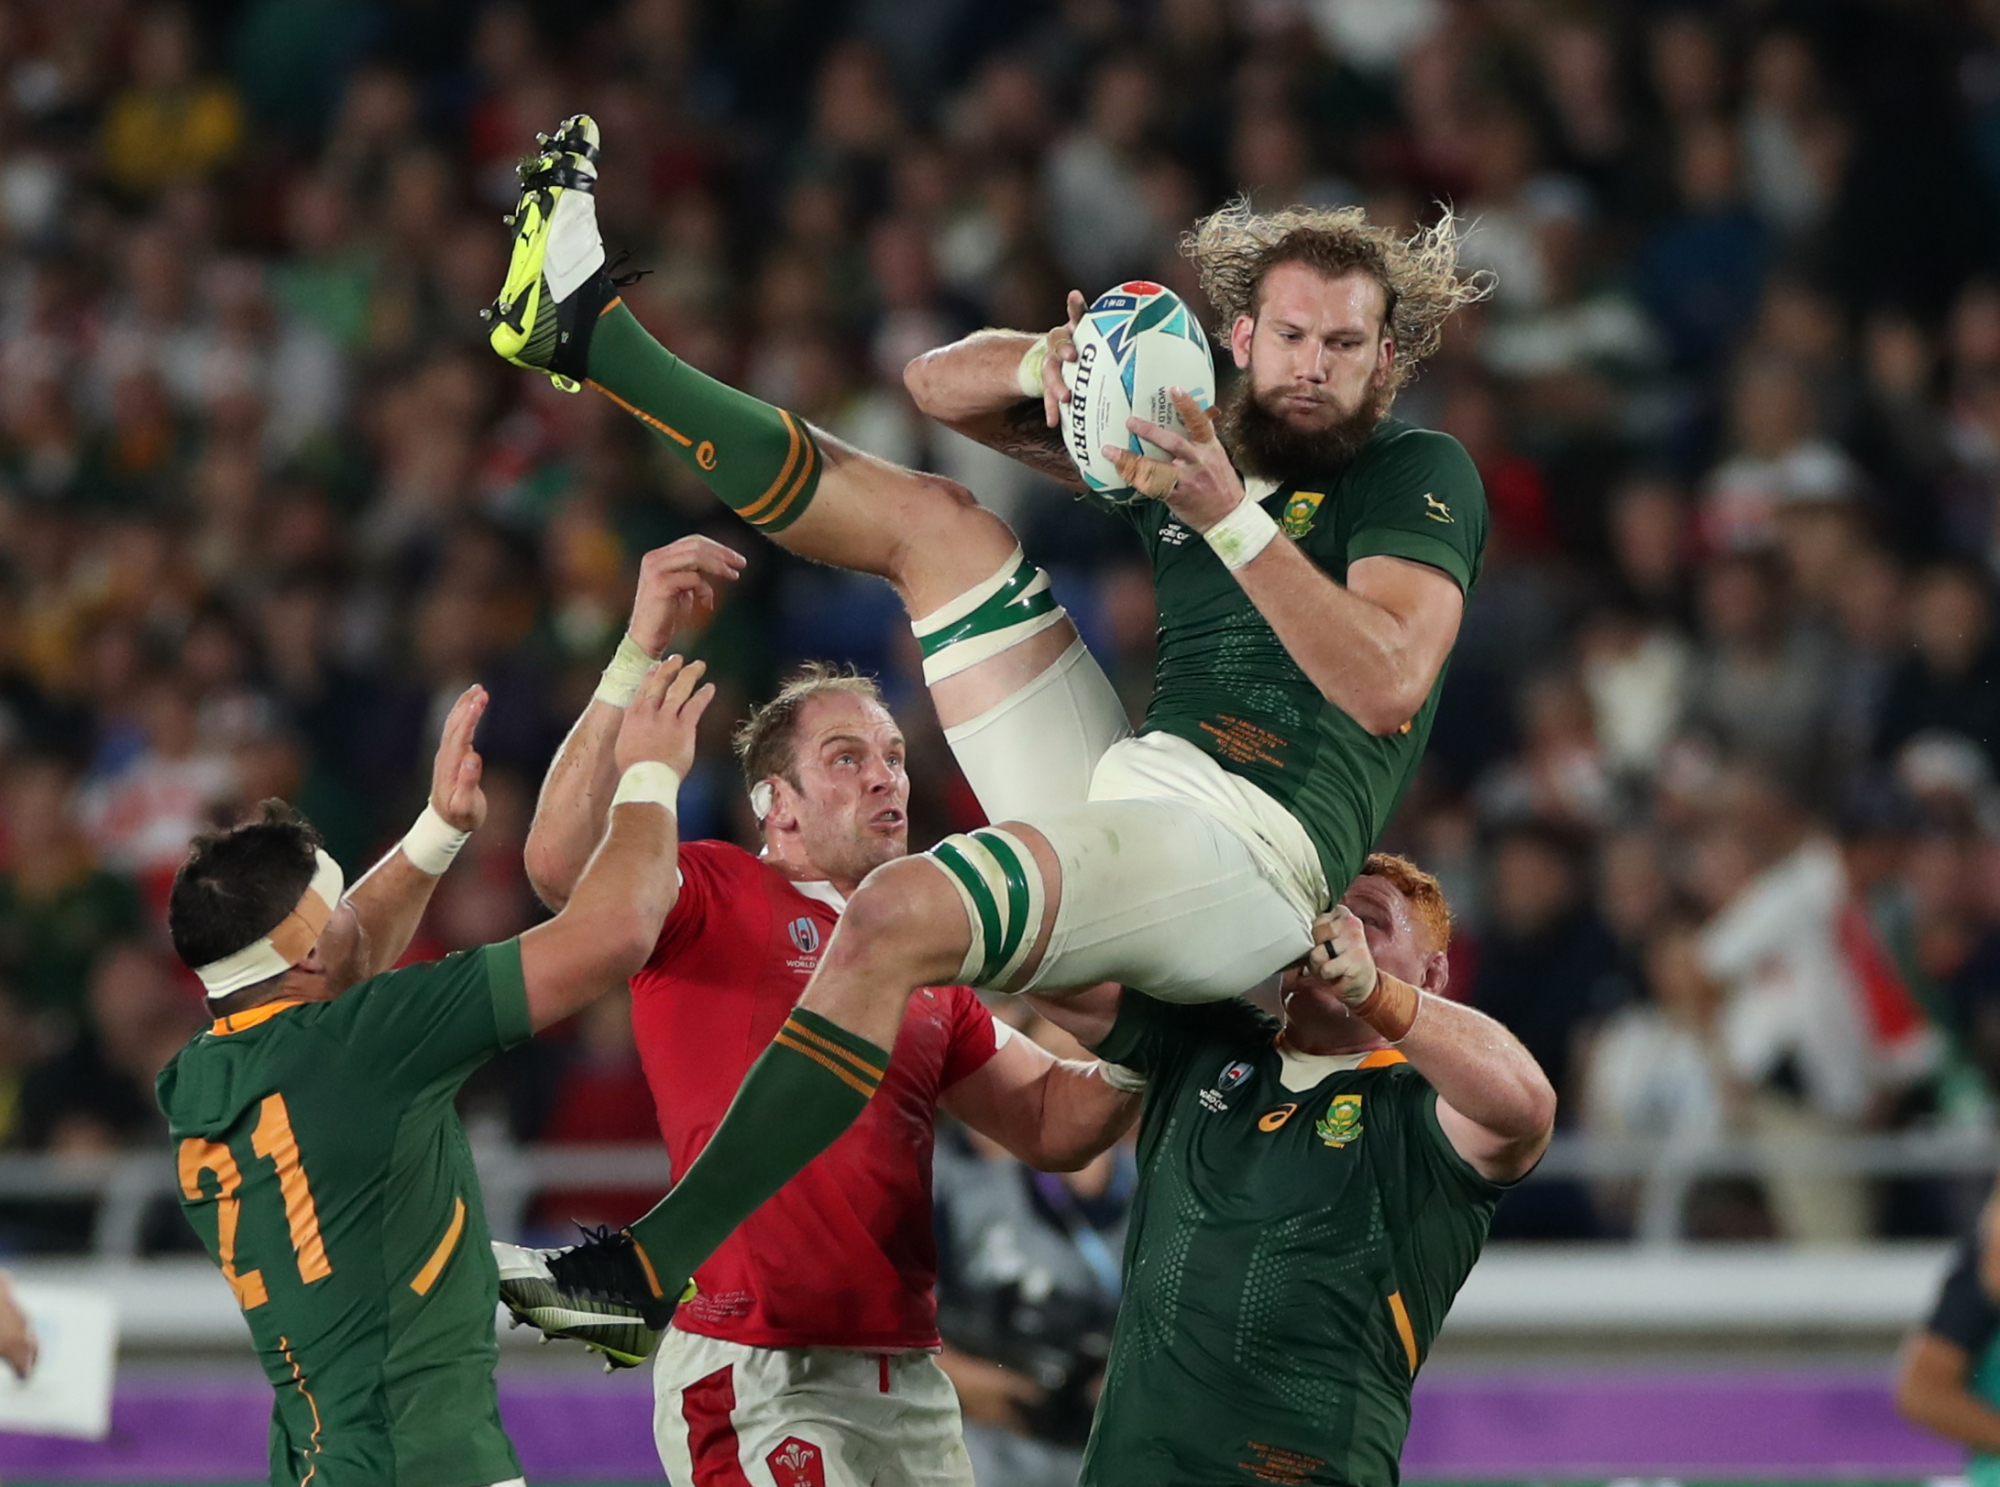 South Africa outlasts Wales in semifinal thriller to reach Rugby World Cup final